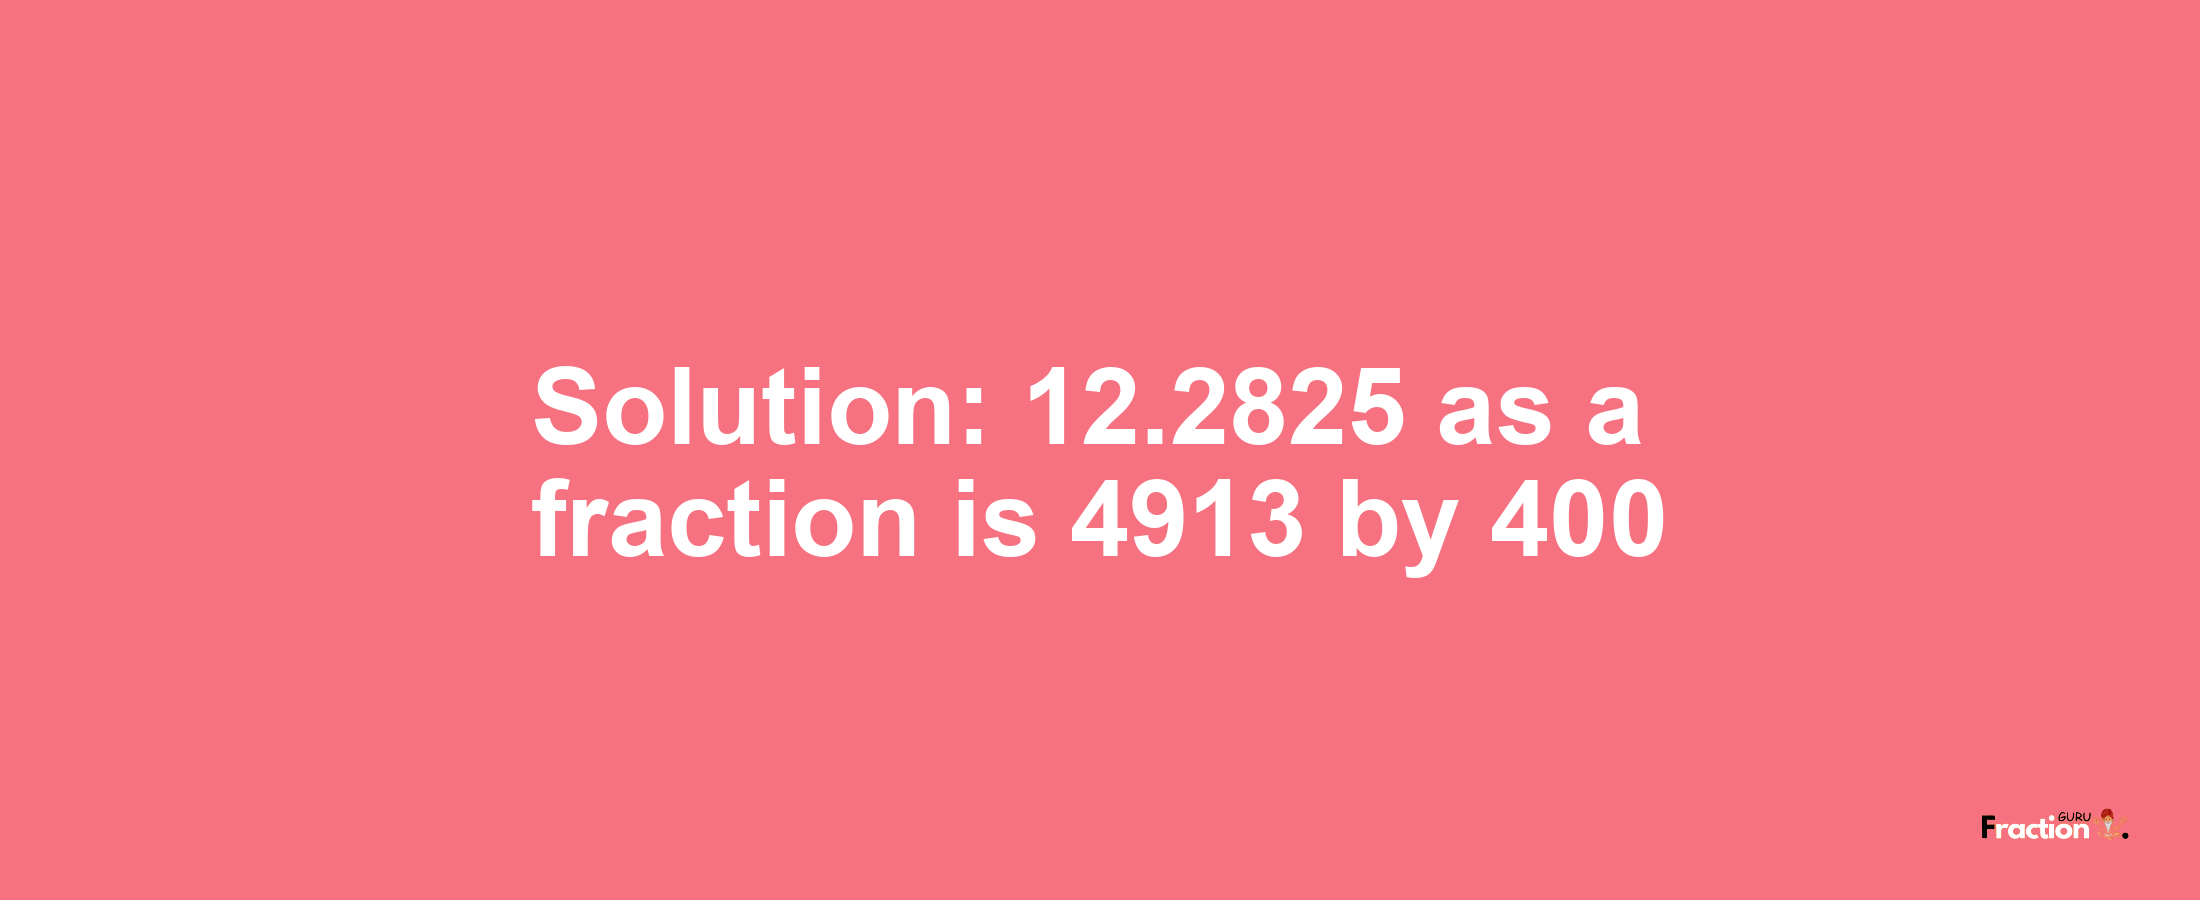 Solution:12.2825 as a fraction is 4913/400